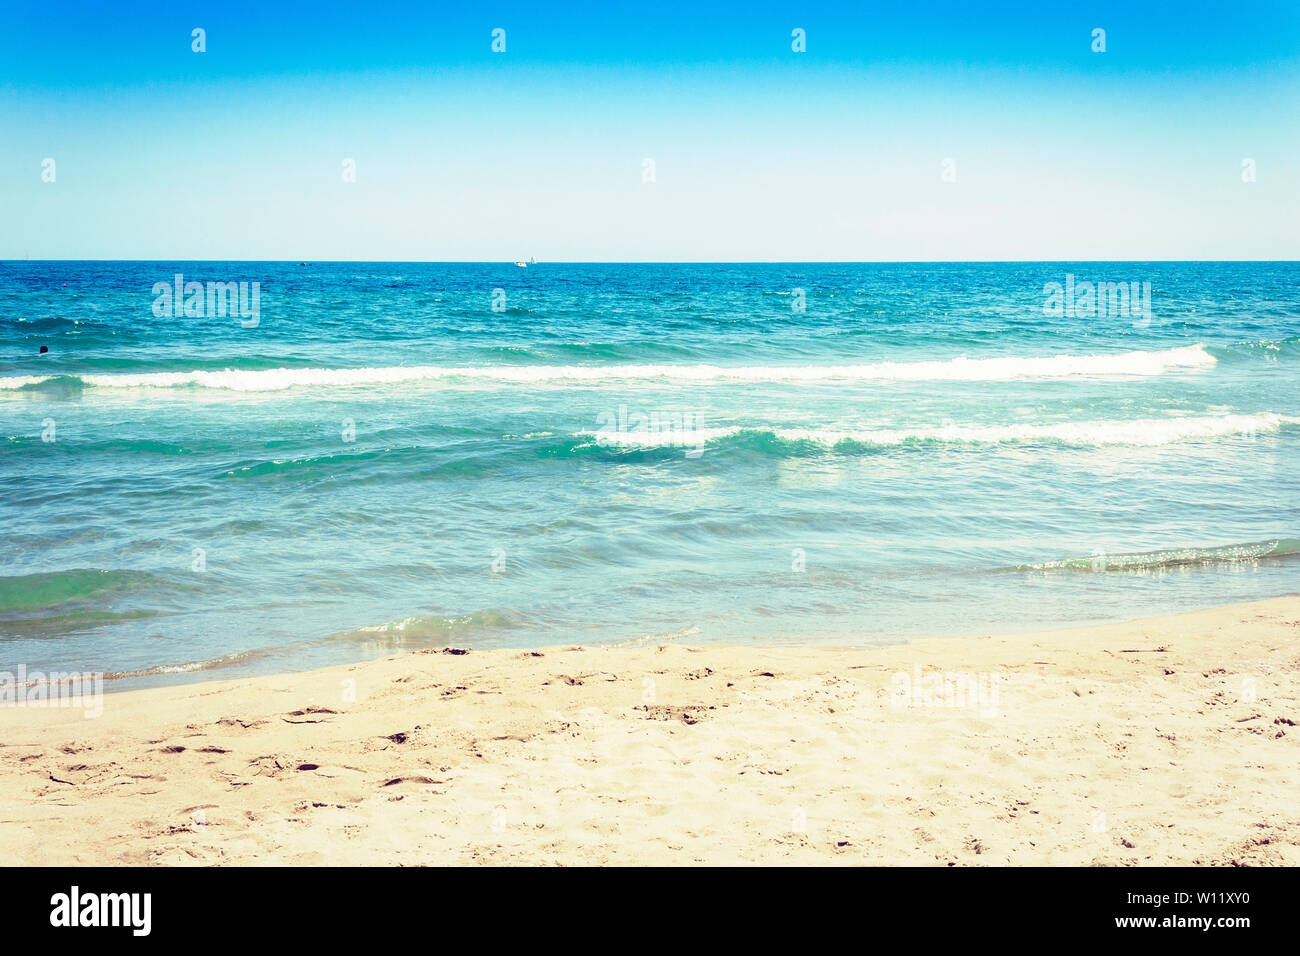 View of the beach of ionic sea near Catania, Sicily, Italy, Lido Cled Stock Photo